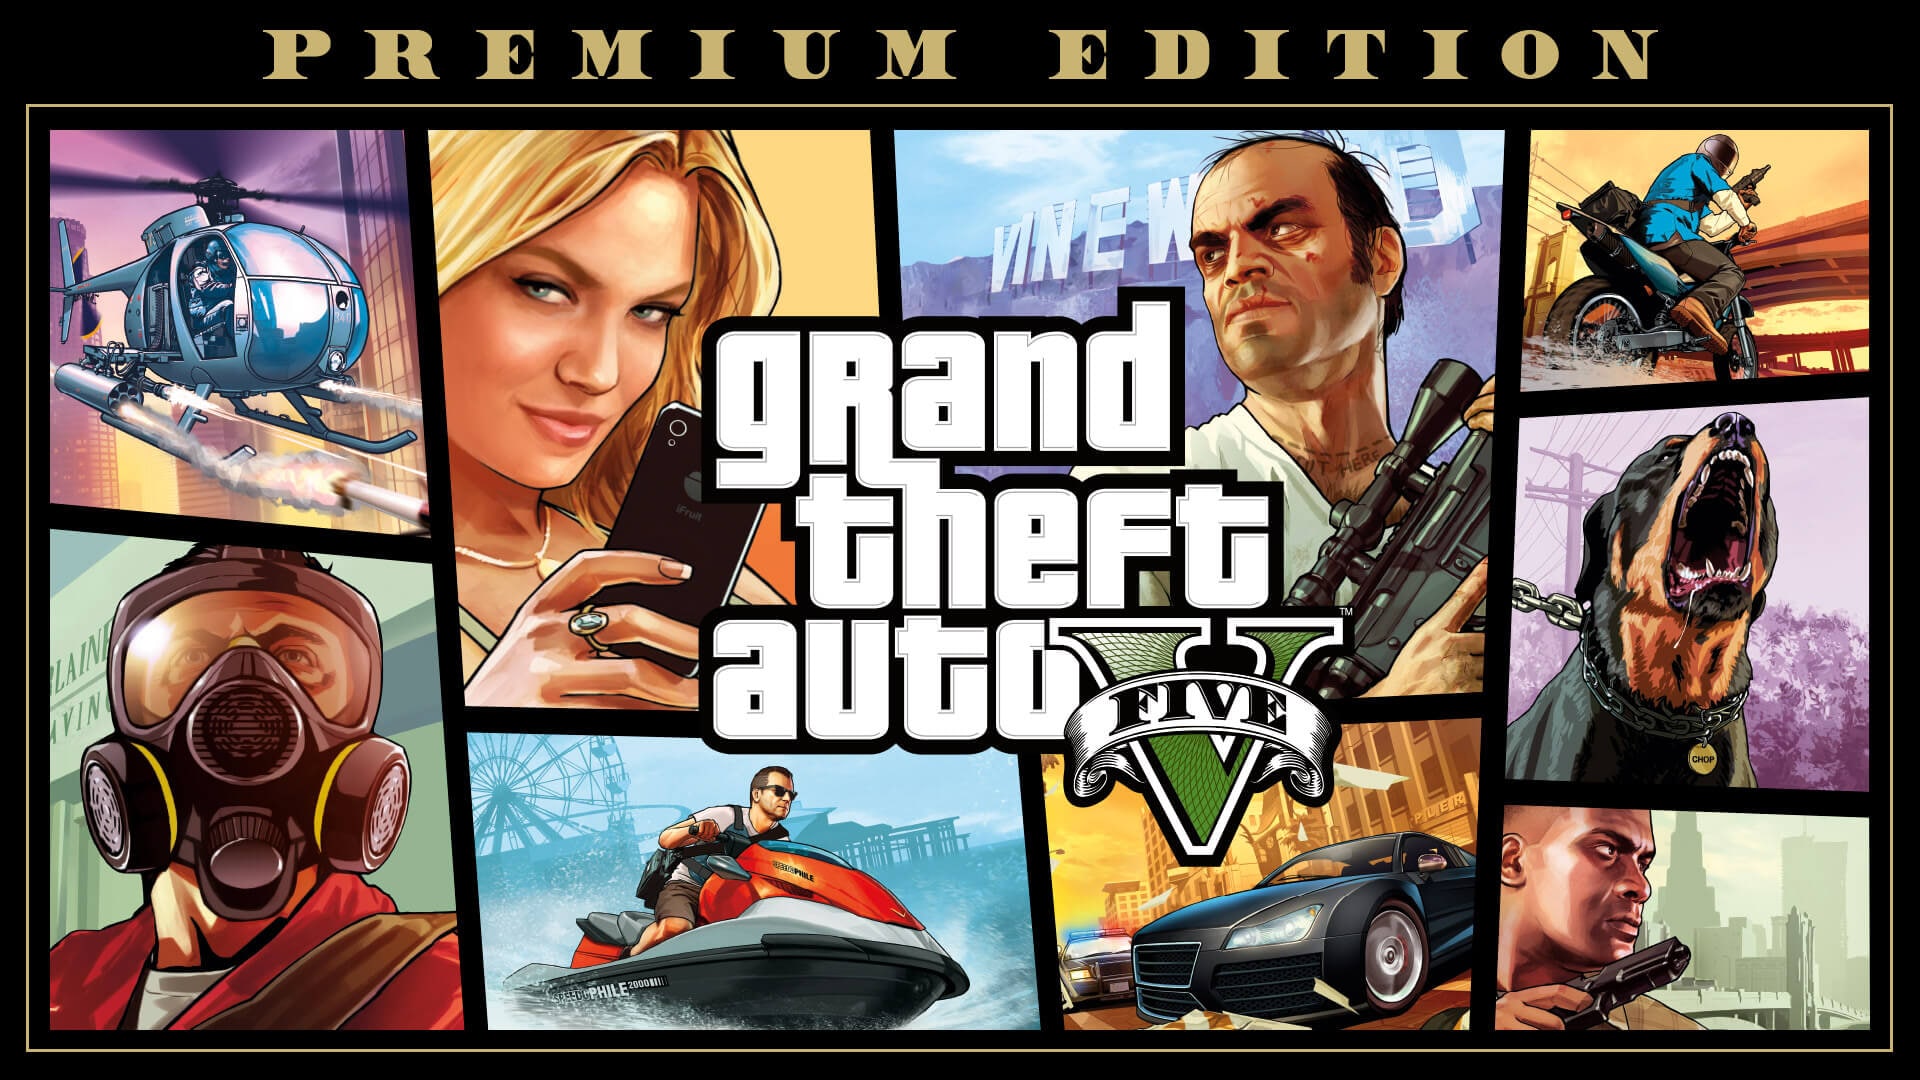 GTA V is available for free until May 21 – here’s how to get it